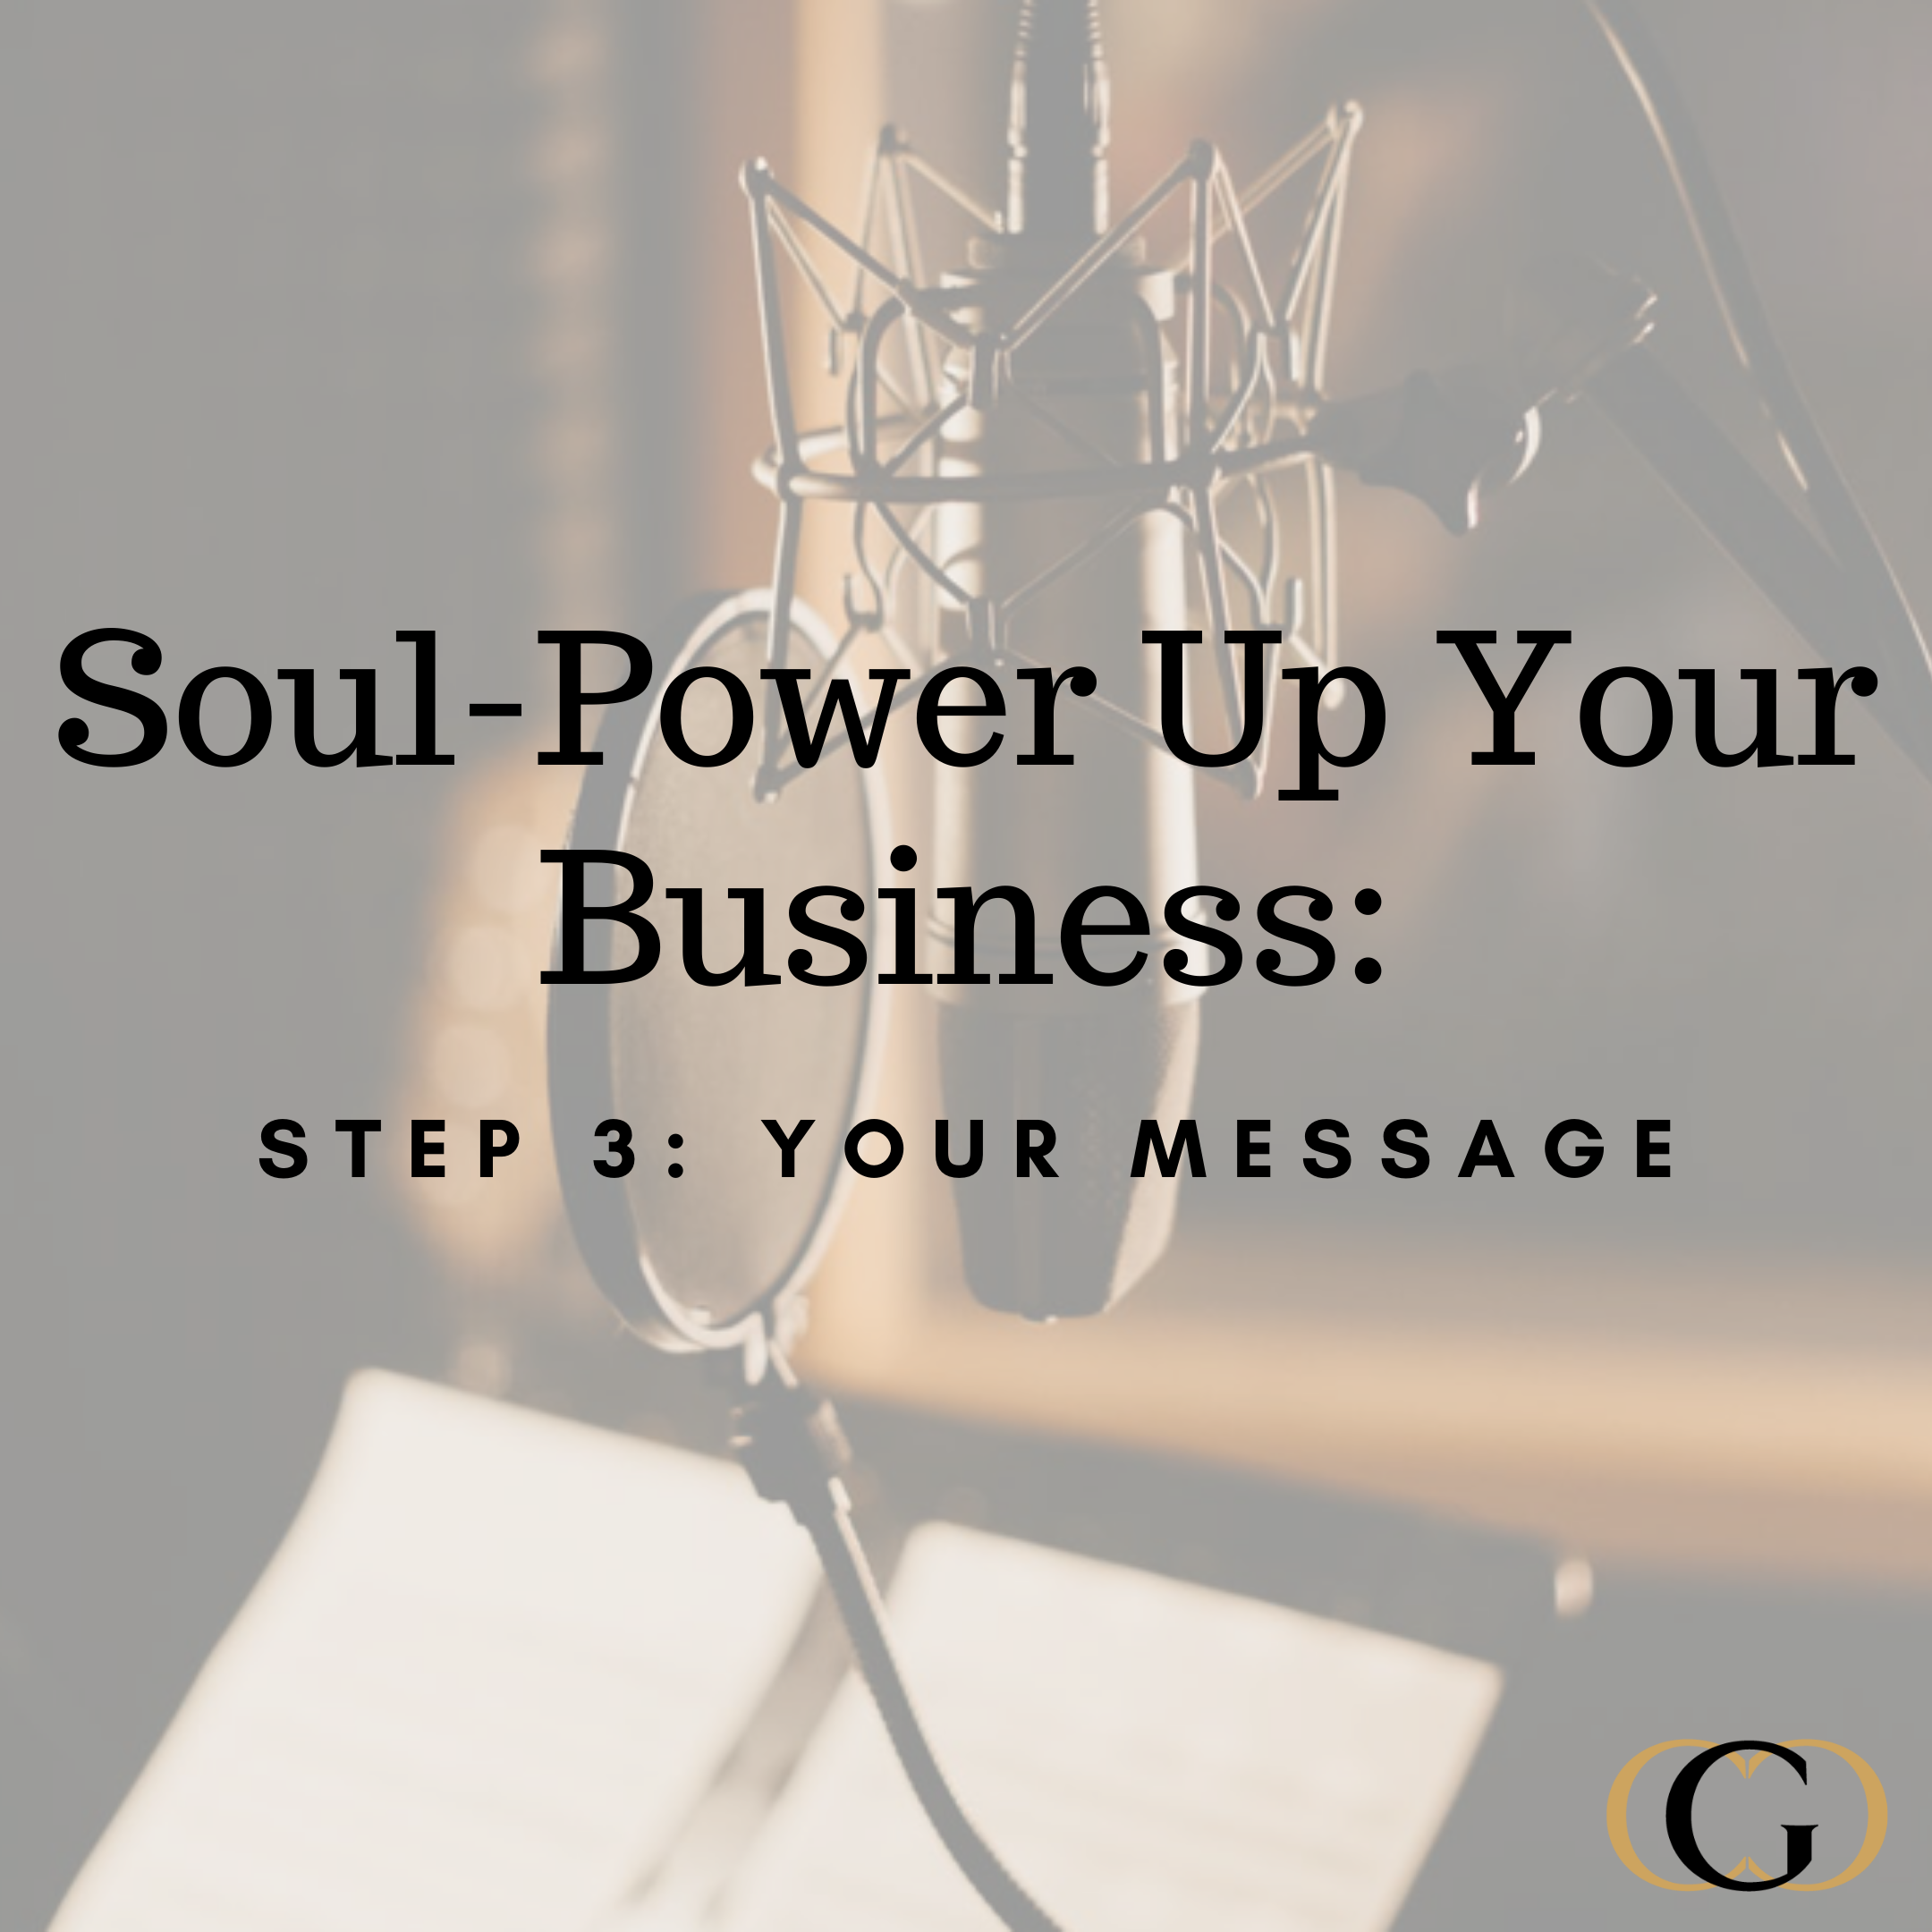 Soul-Power Up Your Business - Step 3 Your Message